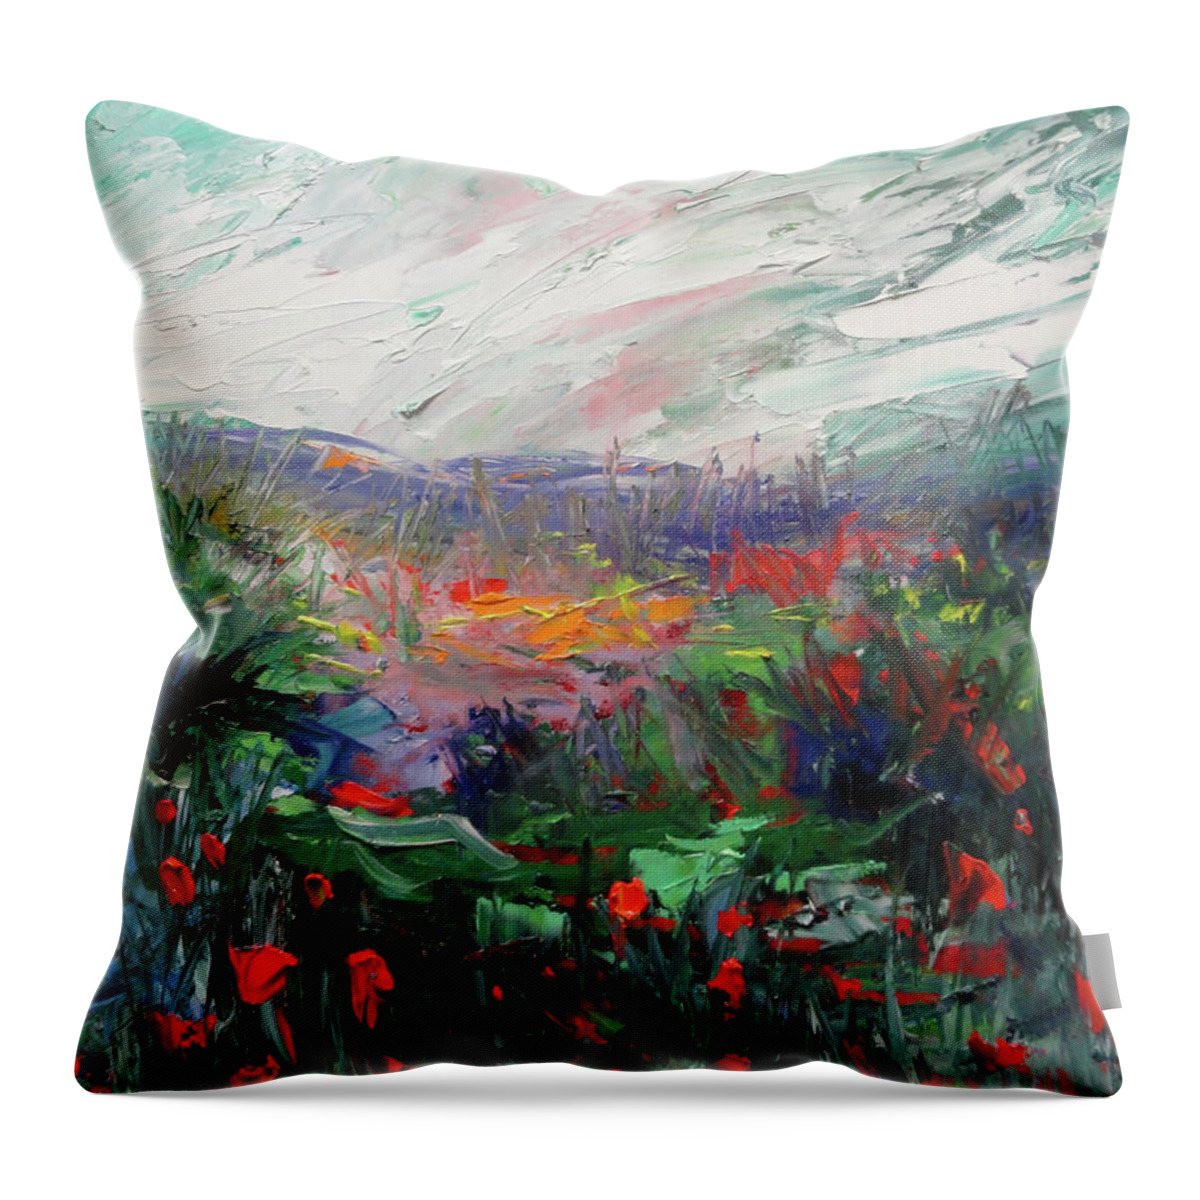 Flowers Throw Pillow featuring the painting Poppy Dream by Shannon Grissom